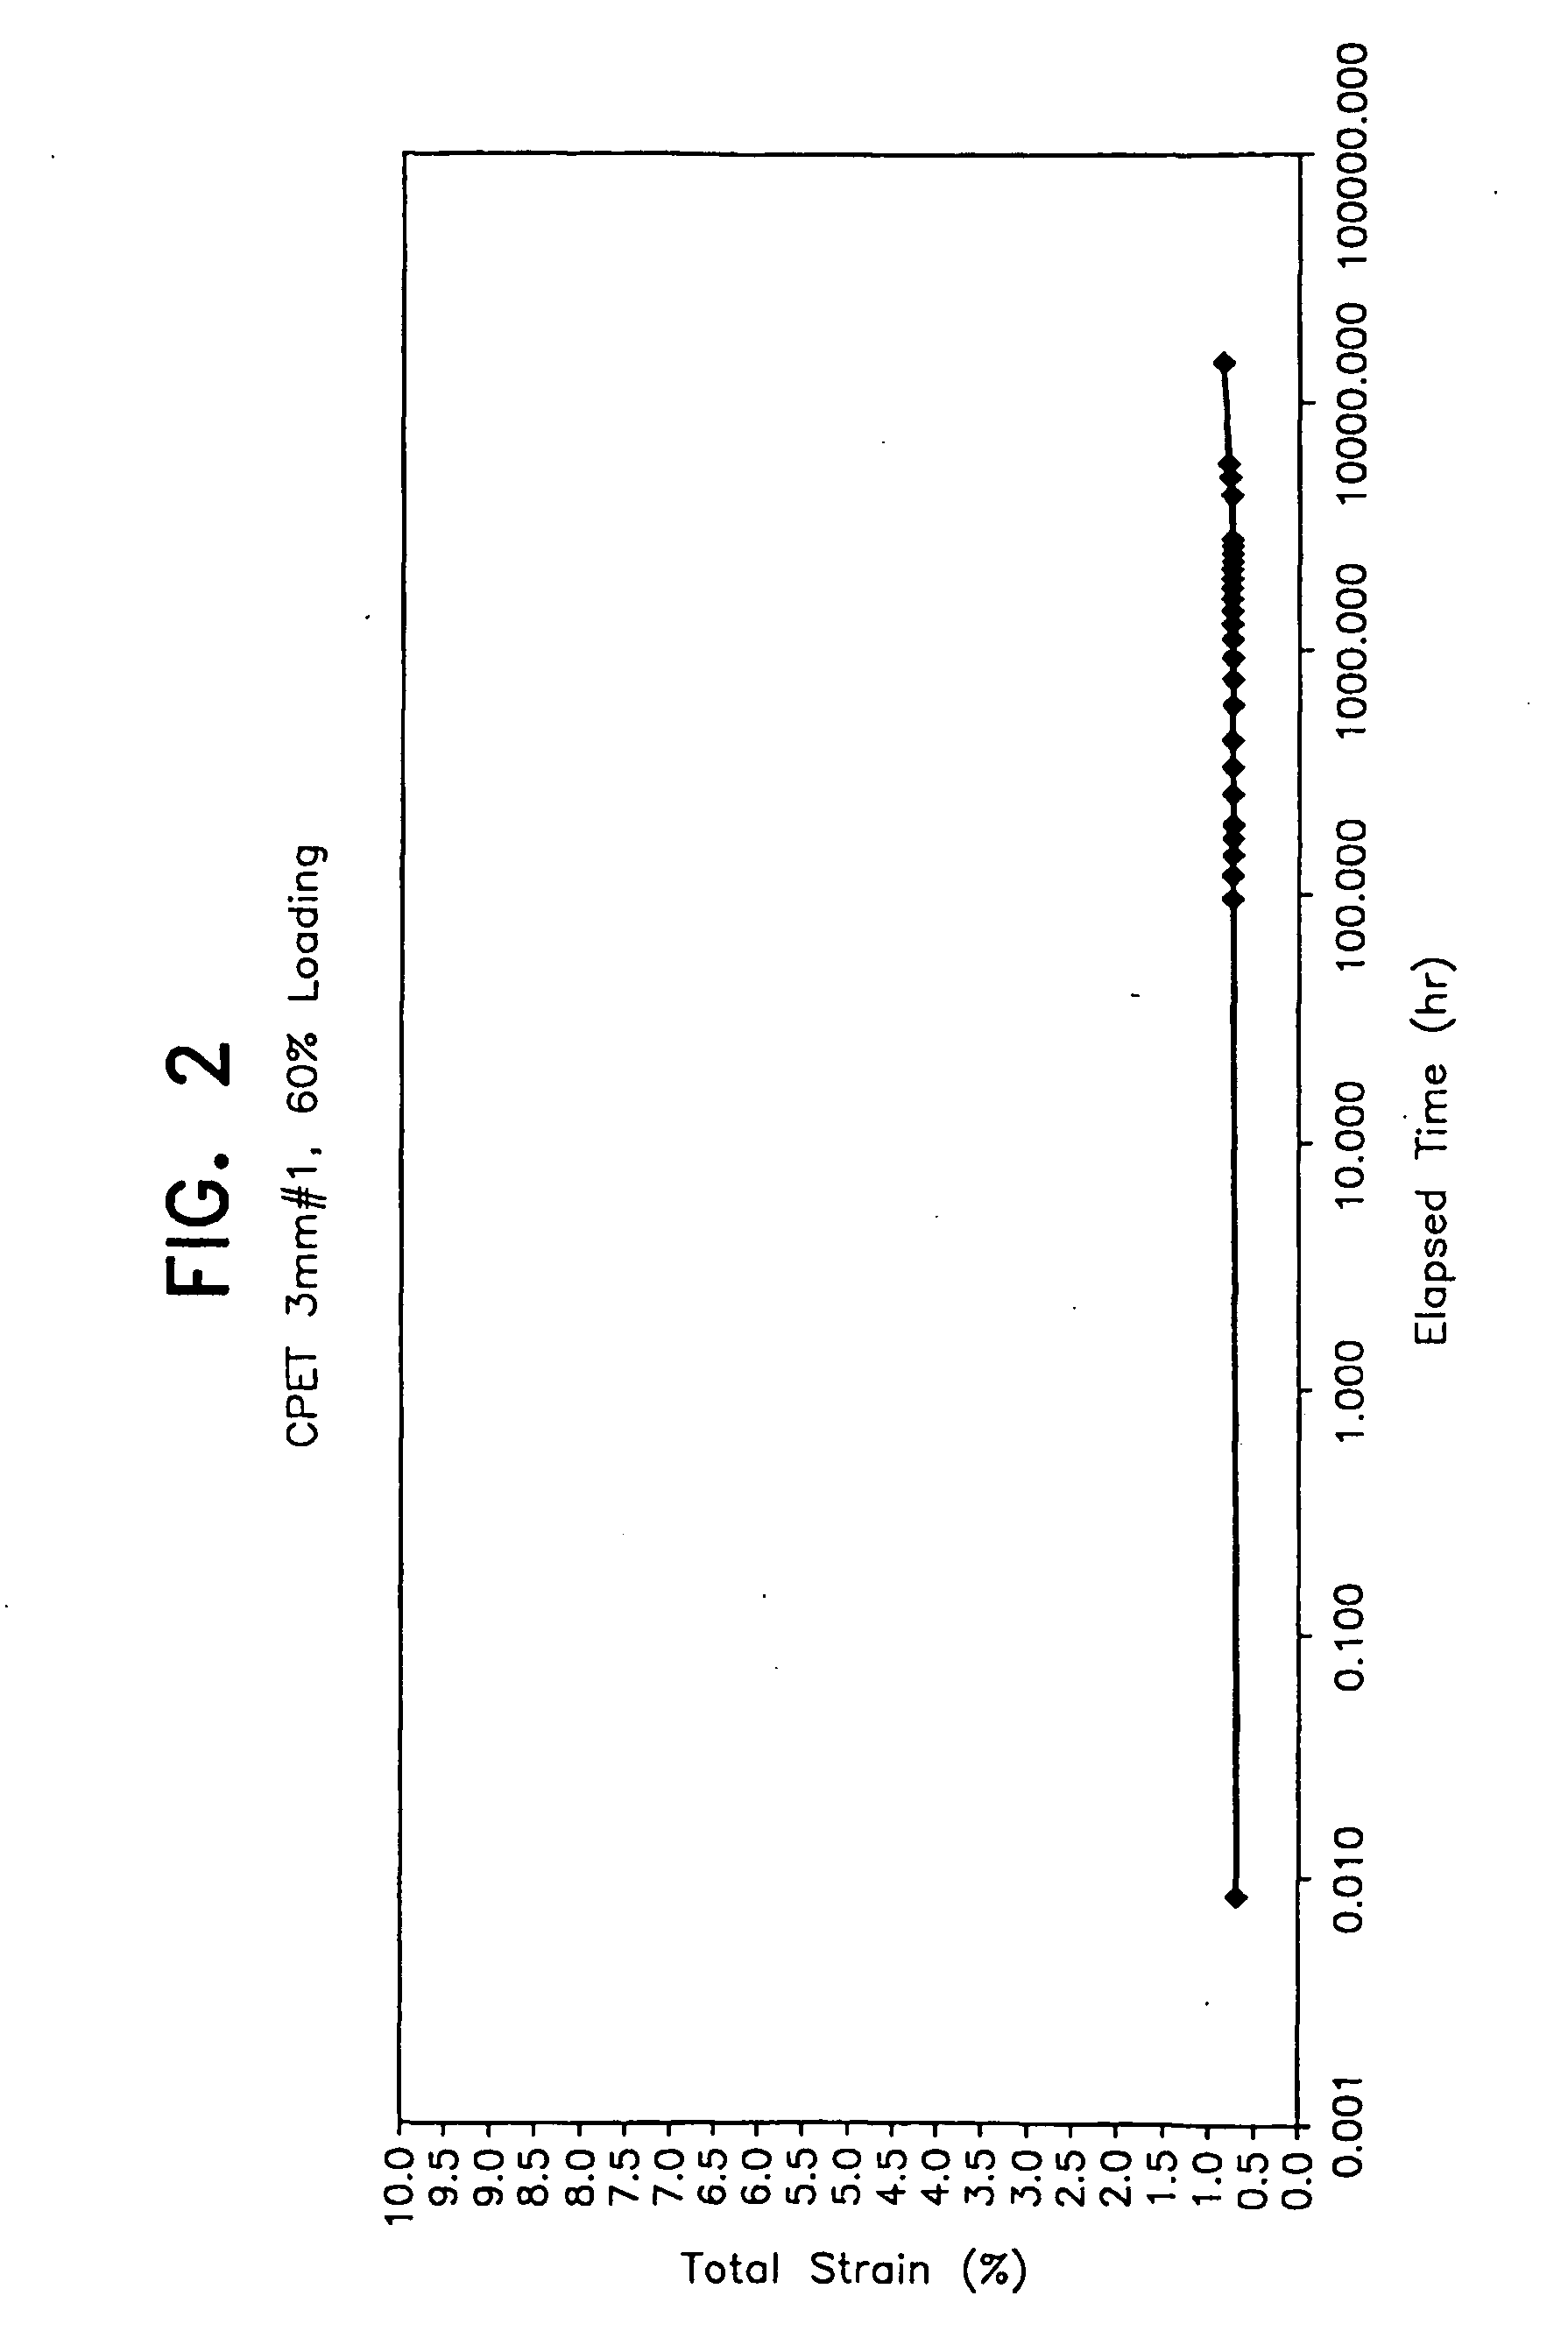 Integral polyethlene terephthalate grids, the method of manufacture, and uses thereof